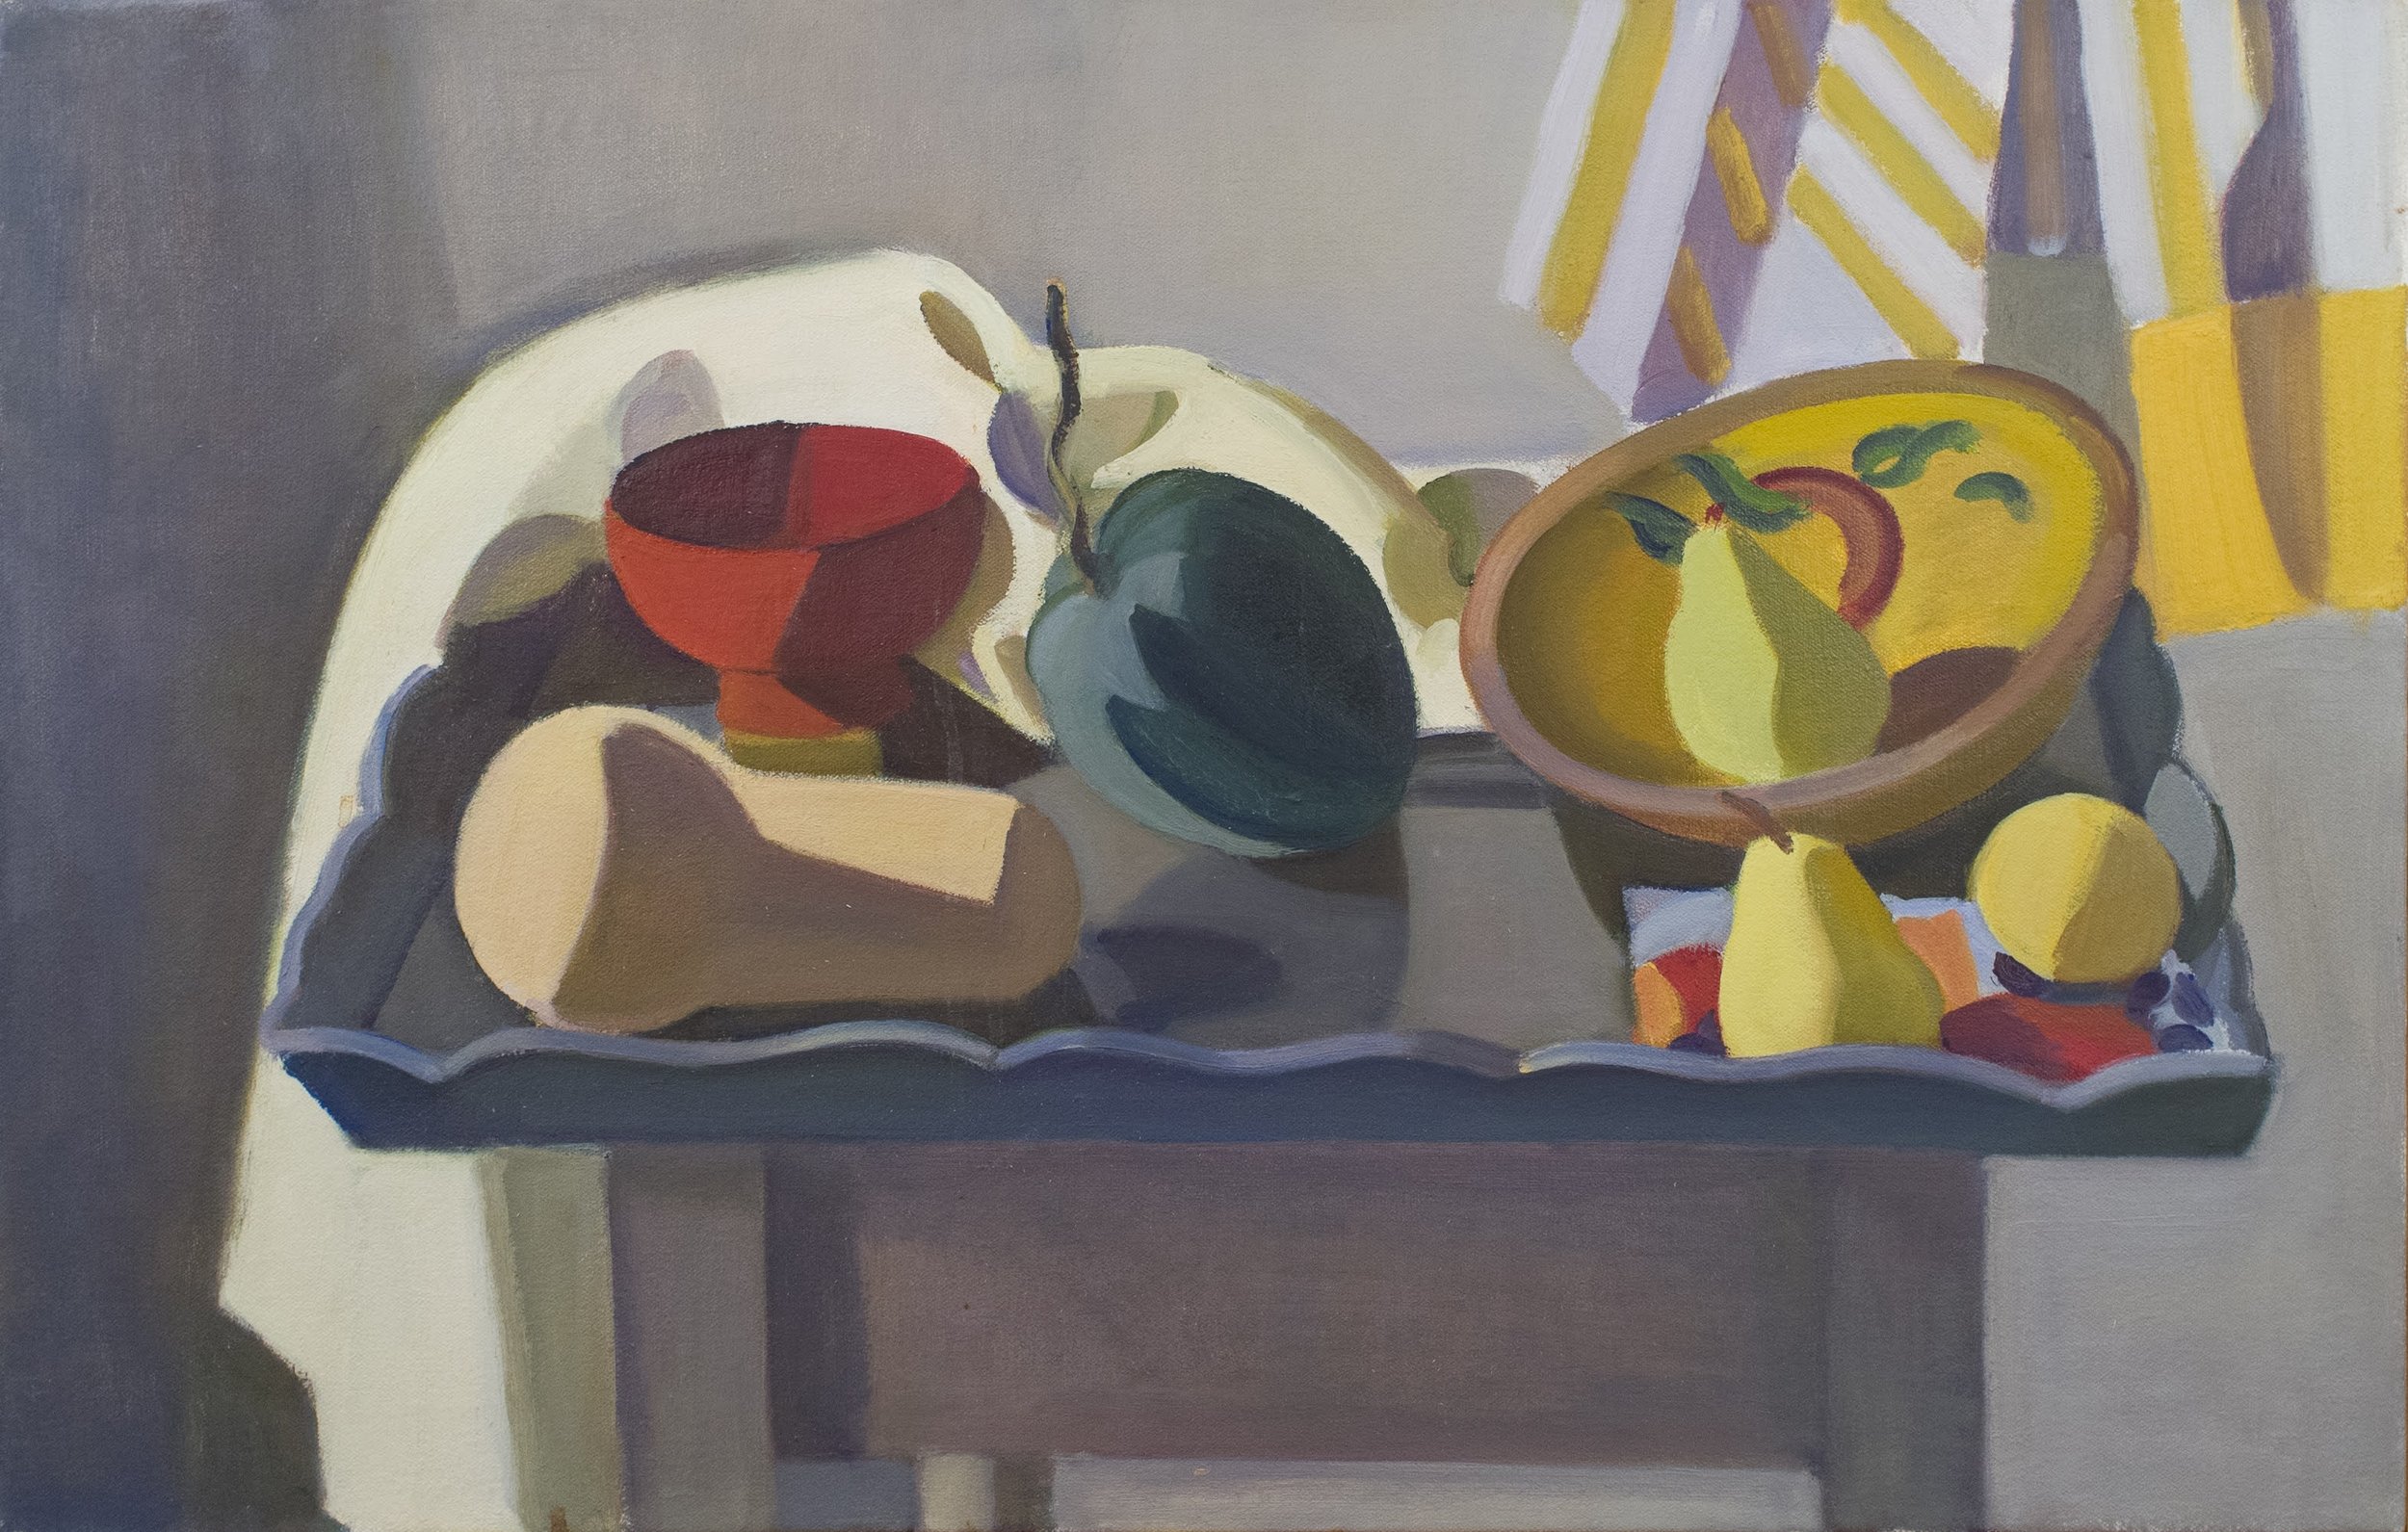   Wooden Bowl with Pear and Squash, Metal Tray , 2001, oil/canvas, 18 x 28 in. (Private collection) 